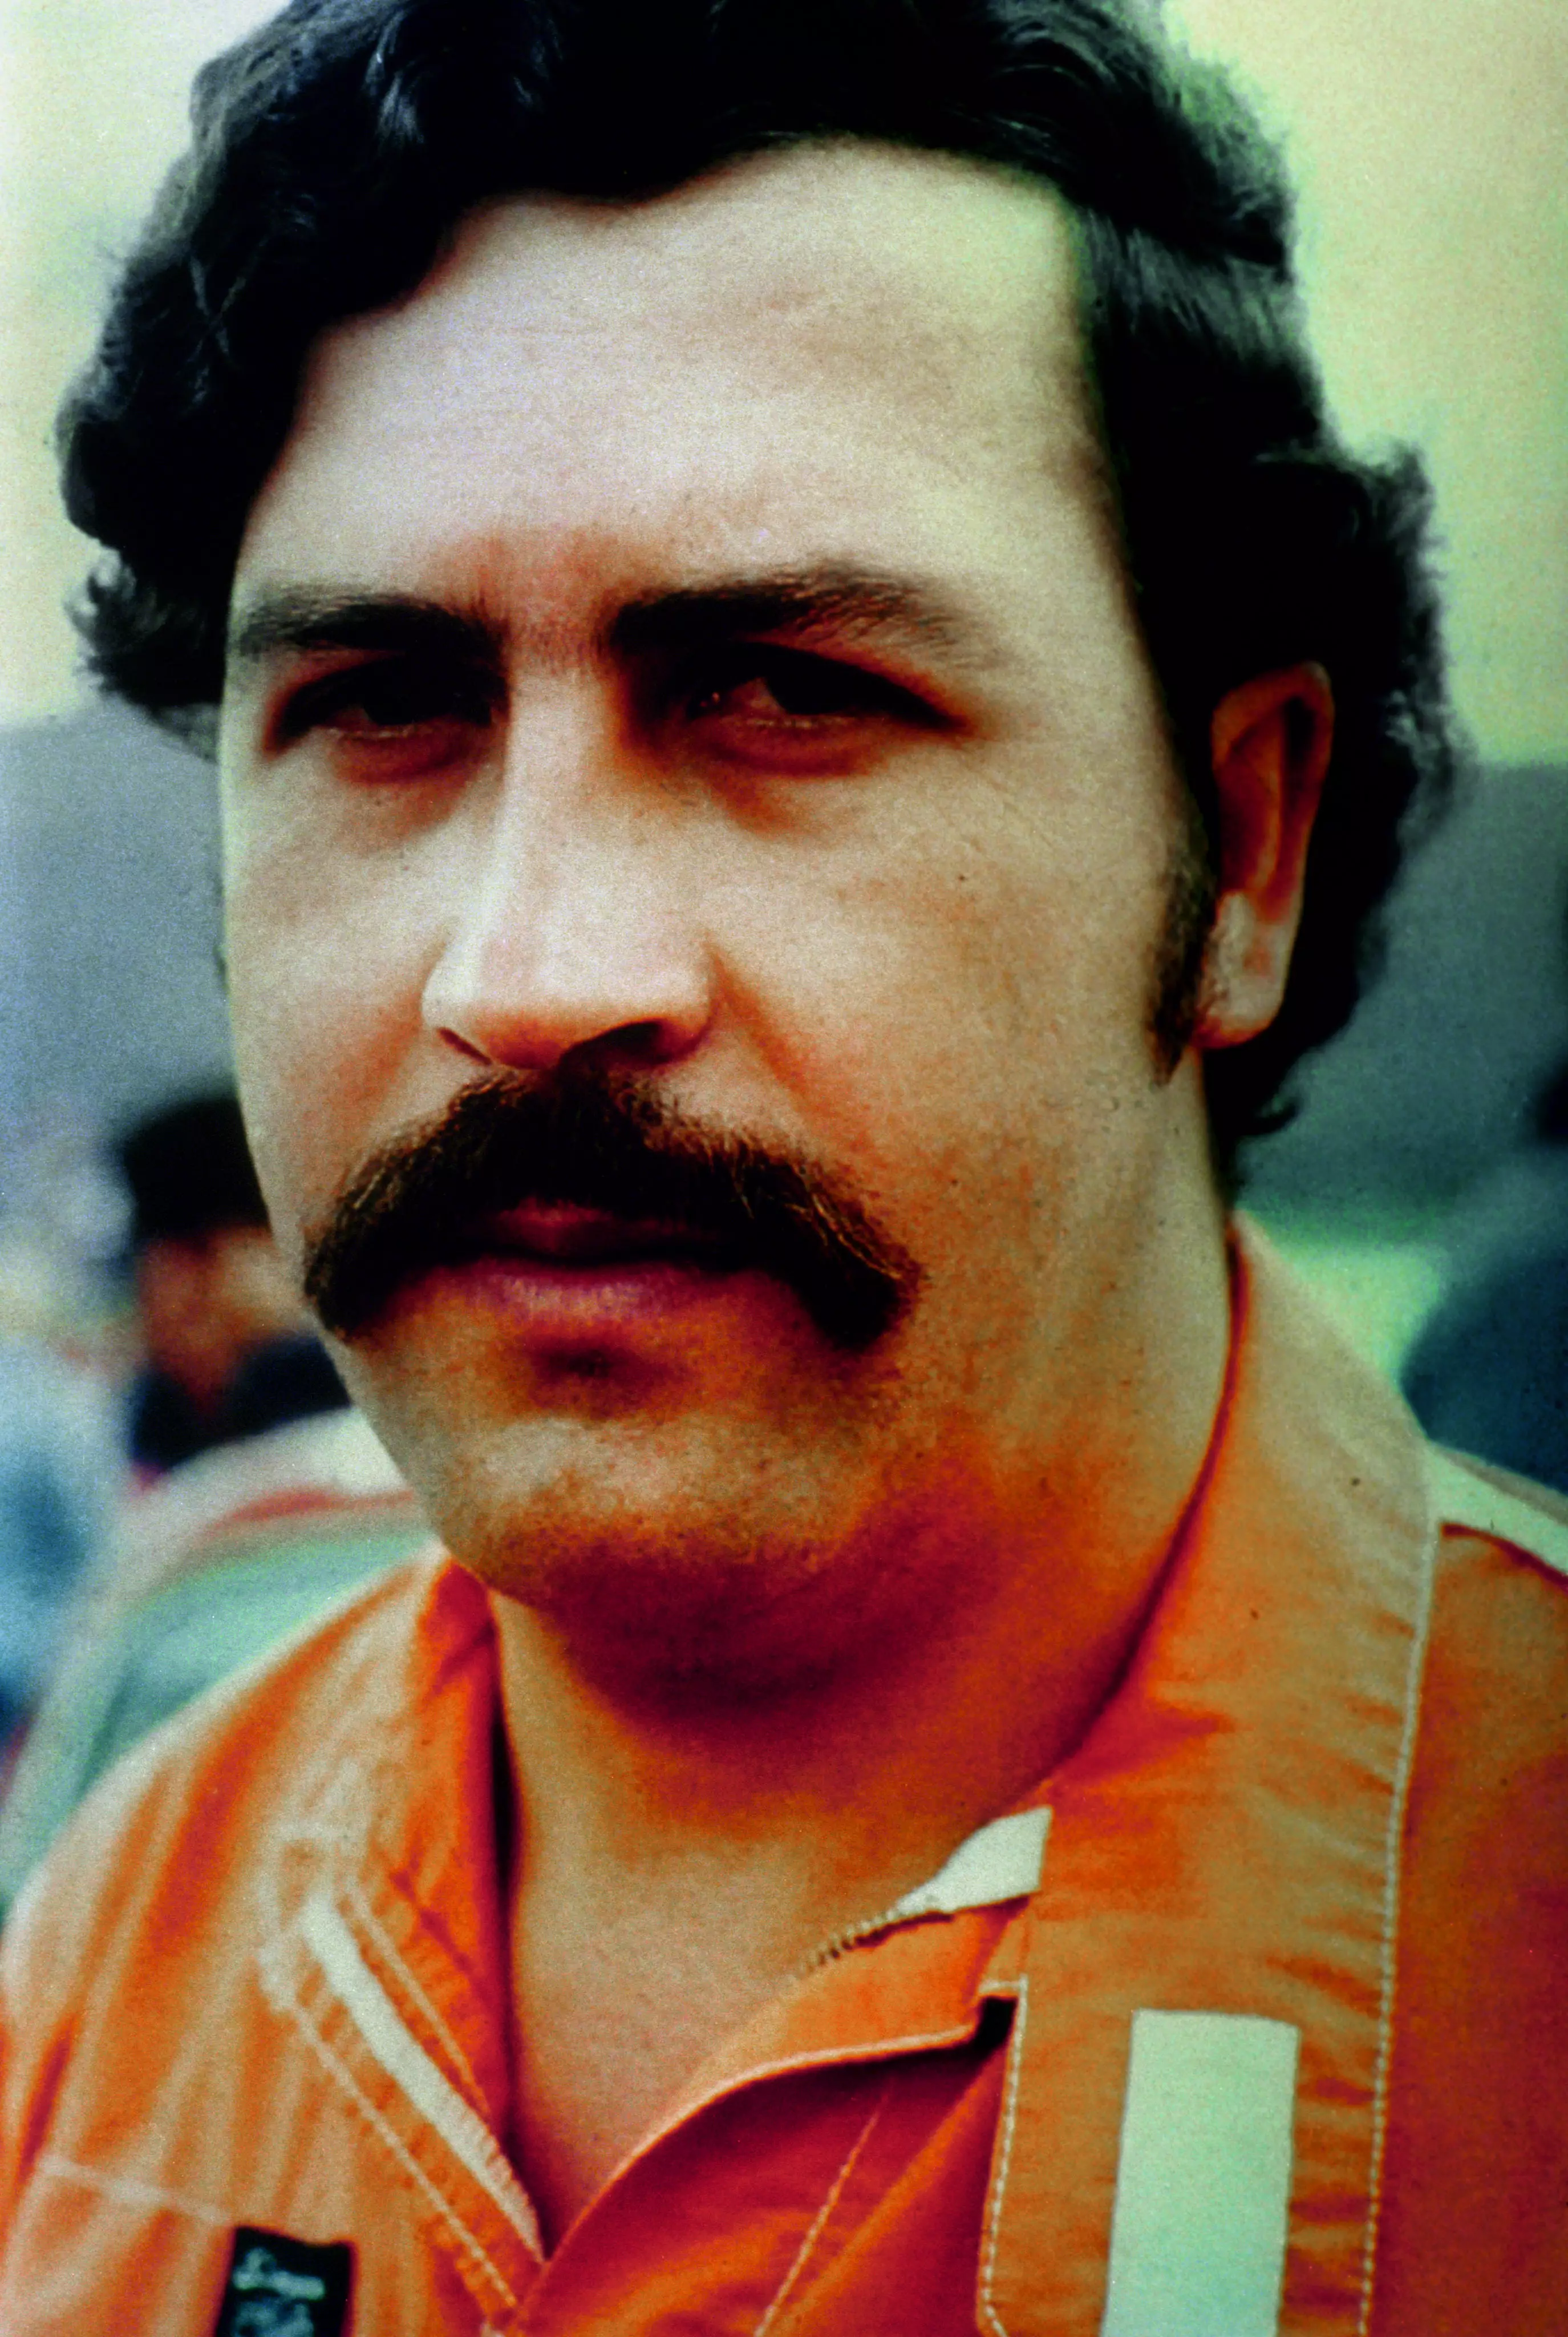 Escobar was the biggest cocaine manufacturer and distributor in the world in the '80s.